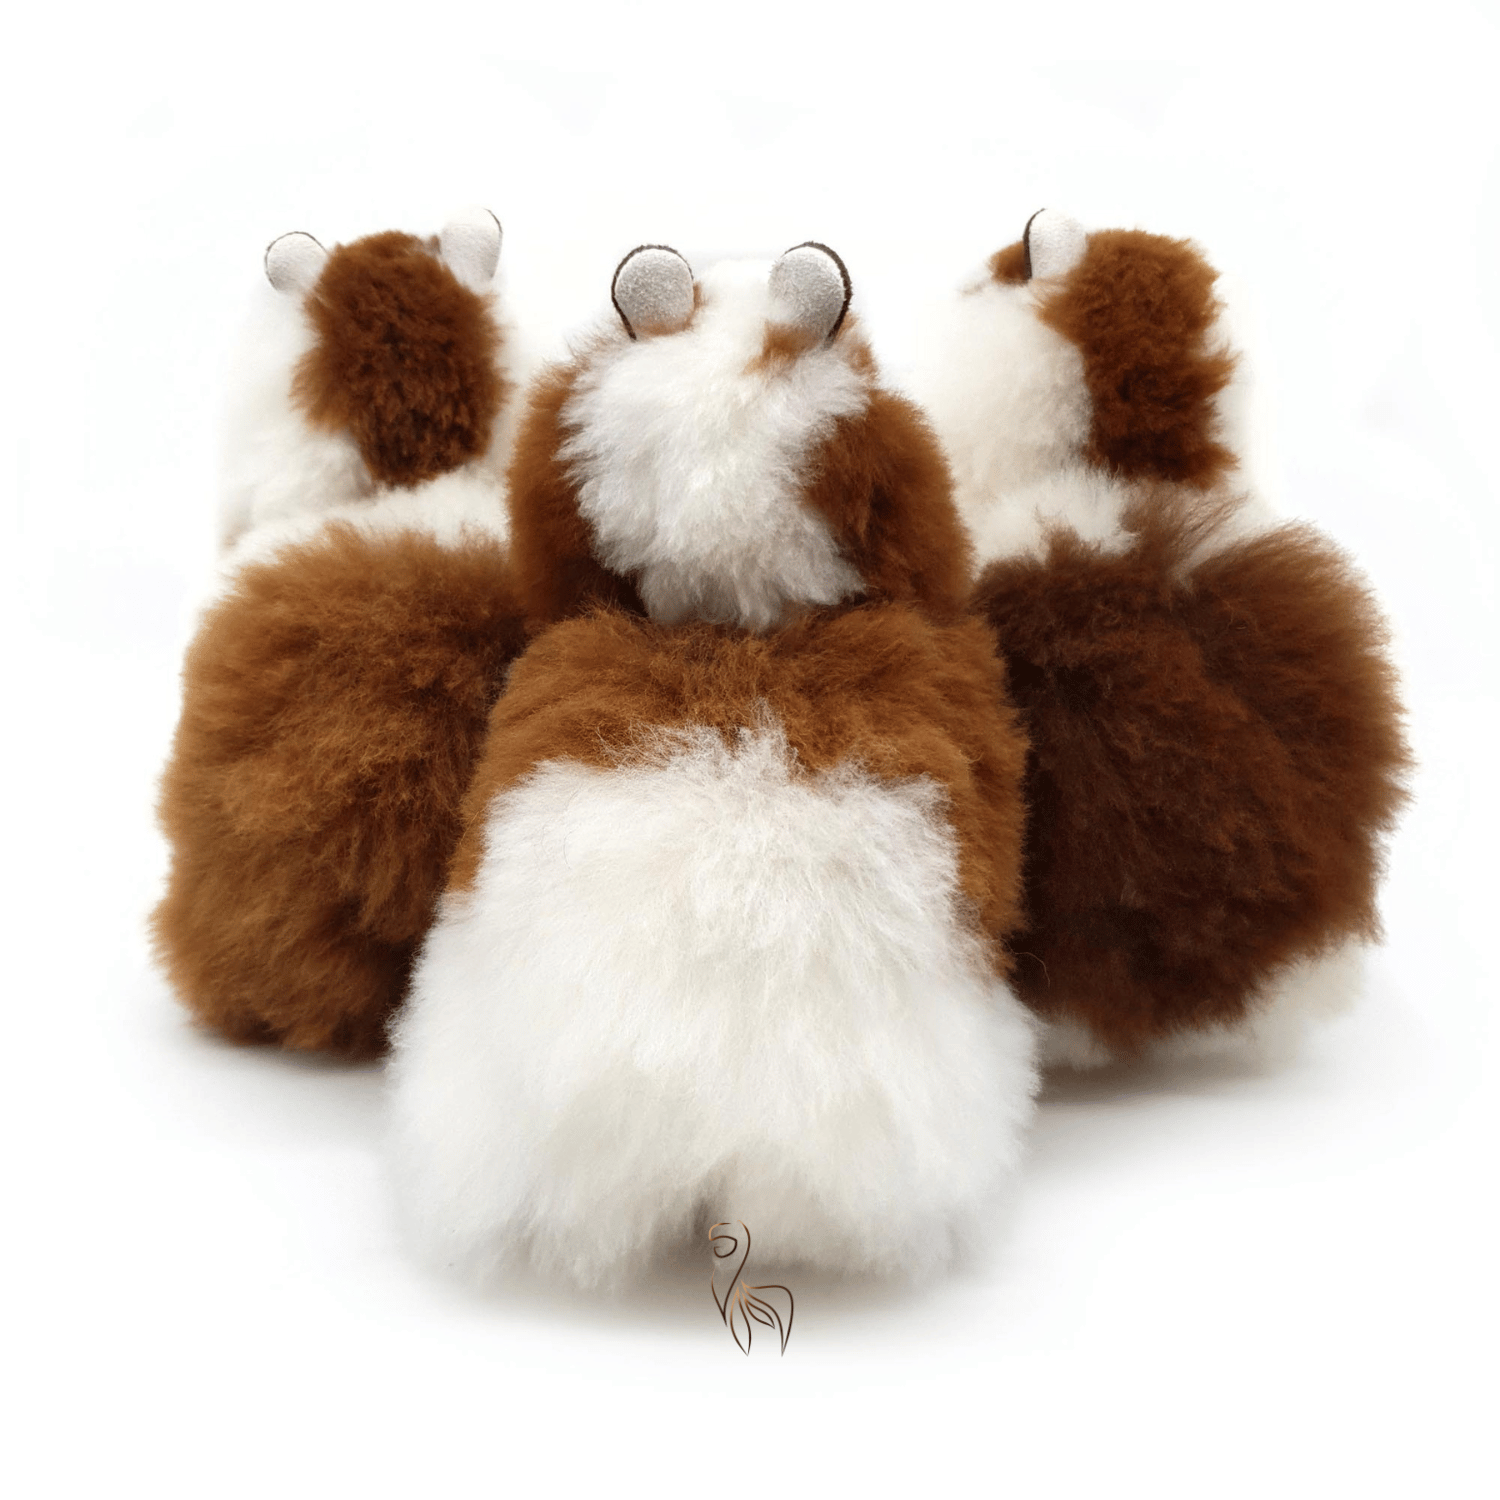 Chocolate Syrup - Small Alpaca Toy (23cm) - Limited Edition